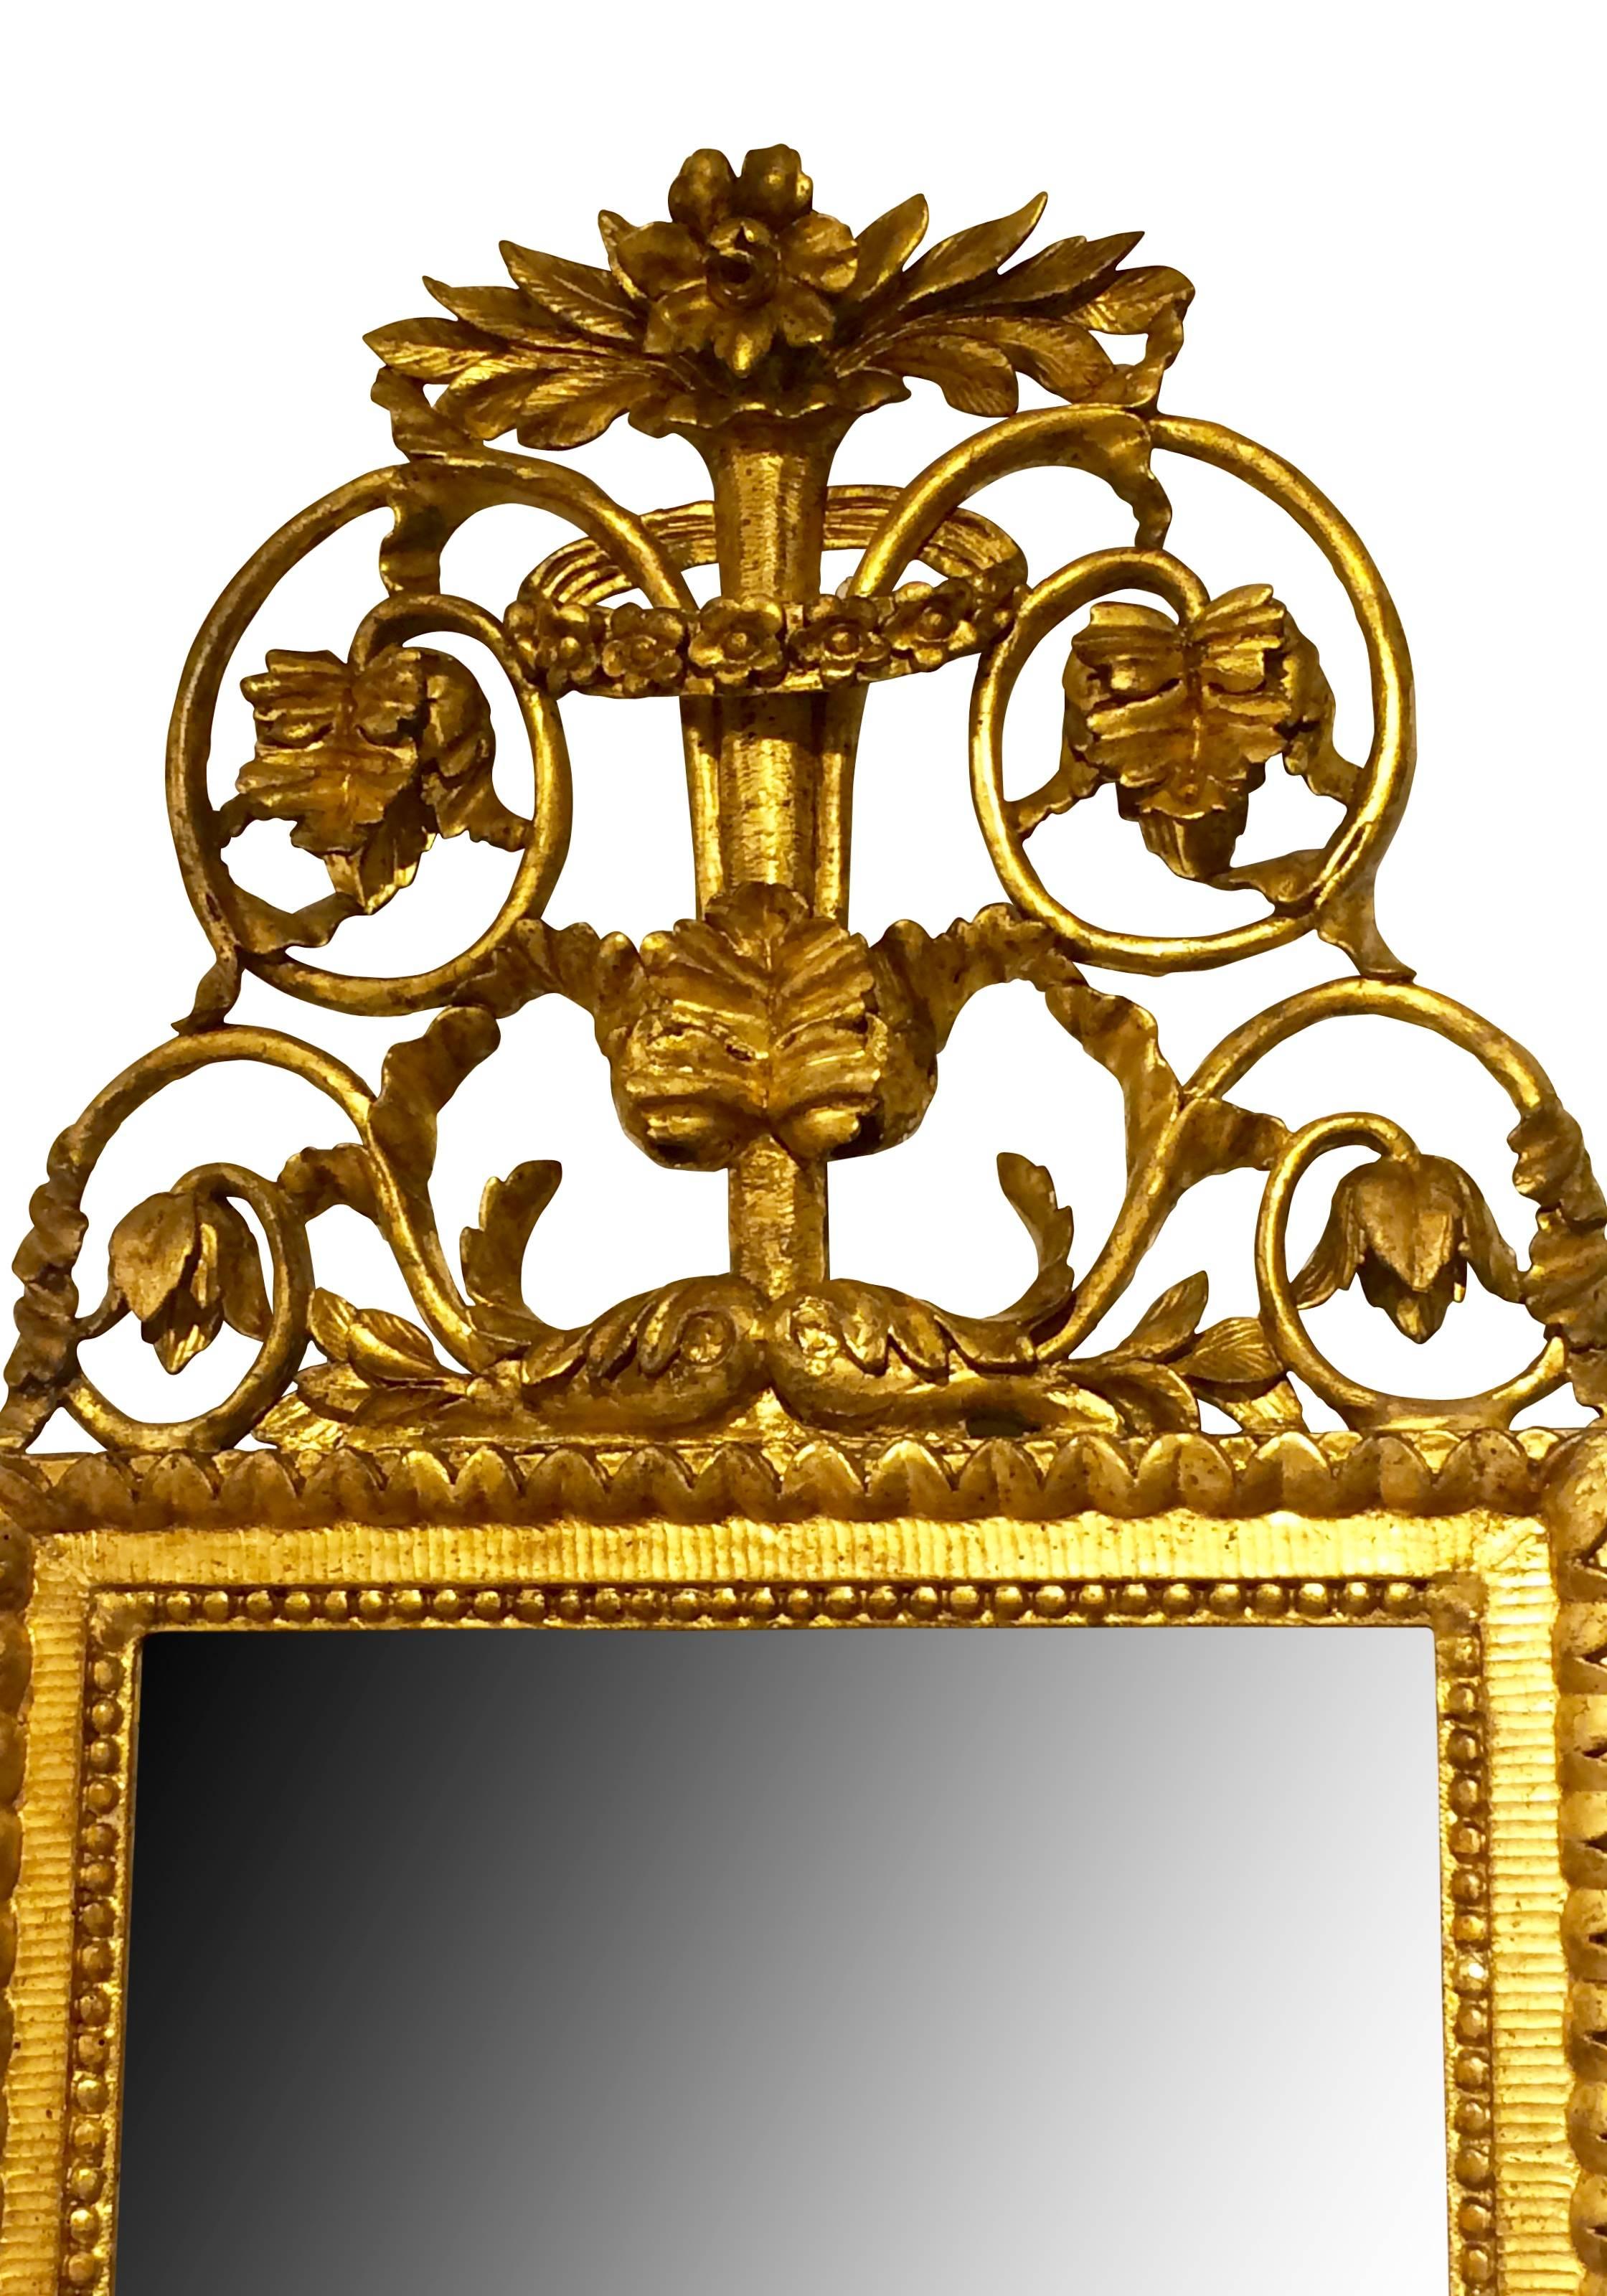 Mirror frame um 1780, with leaves and flowers as crowning. Lindenwood carved with original gilding, Austria. Measures: 95 cm high x 42 cm wide.